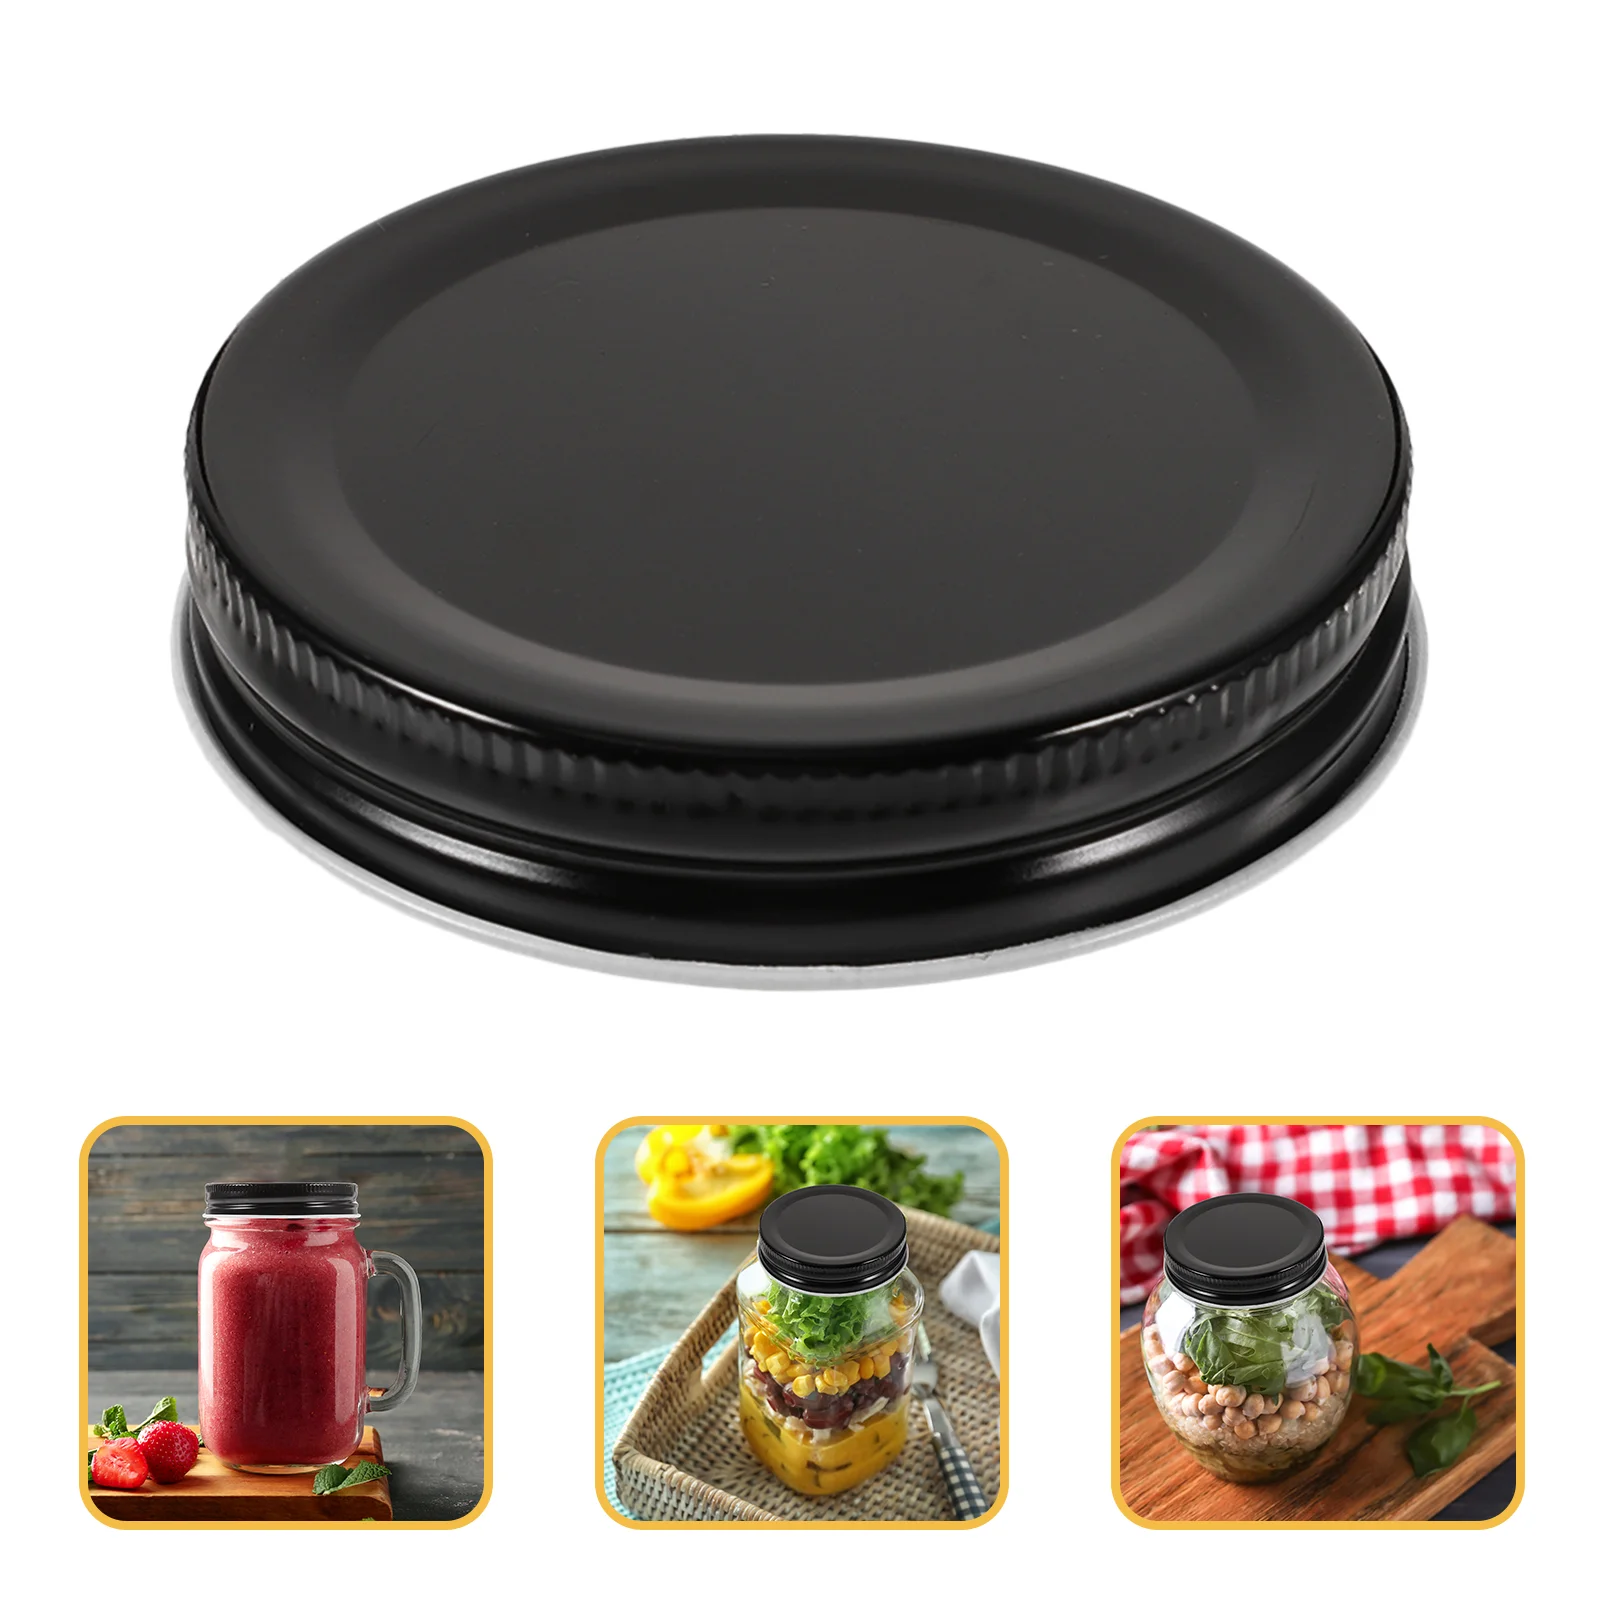 

12Pcs Mason Jar Lids 70Mm Reusable Canning Lids Tinplate Wide Mouth Sealing Canning Covers Jar Covers Storage Caps Regular Mouth